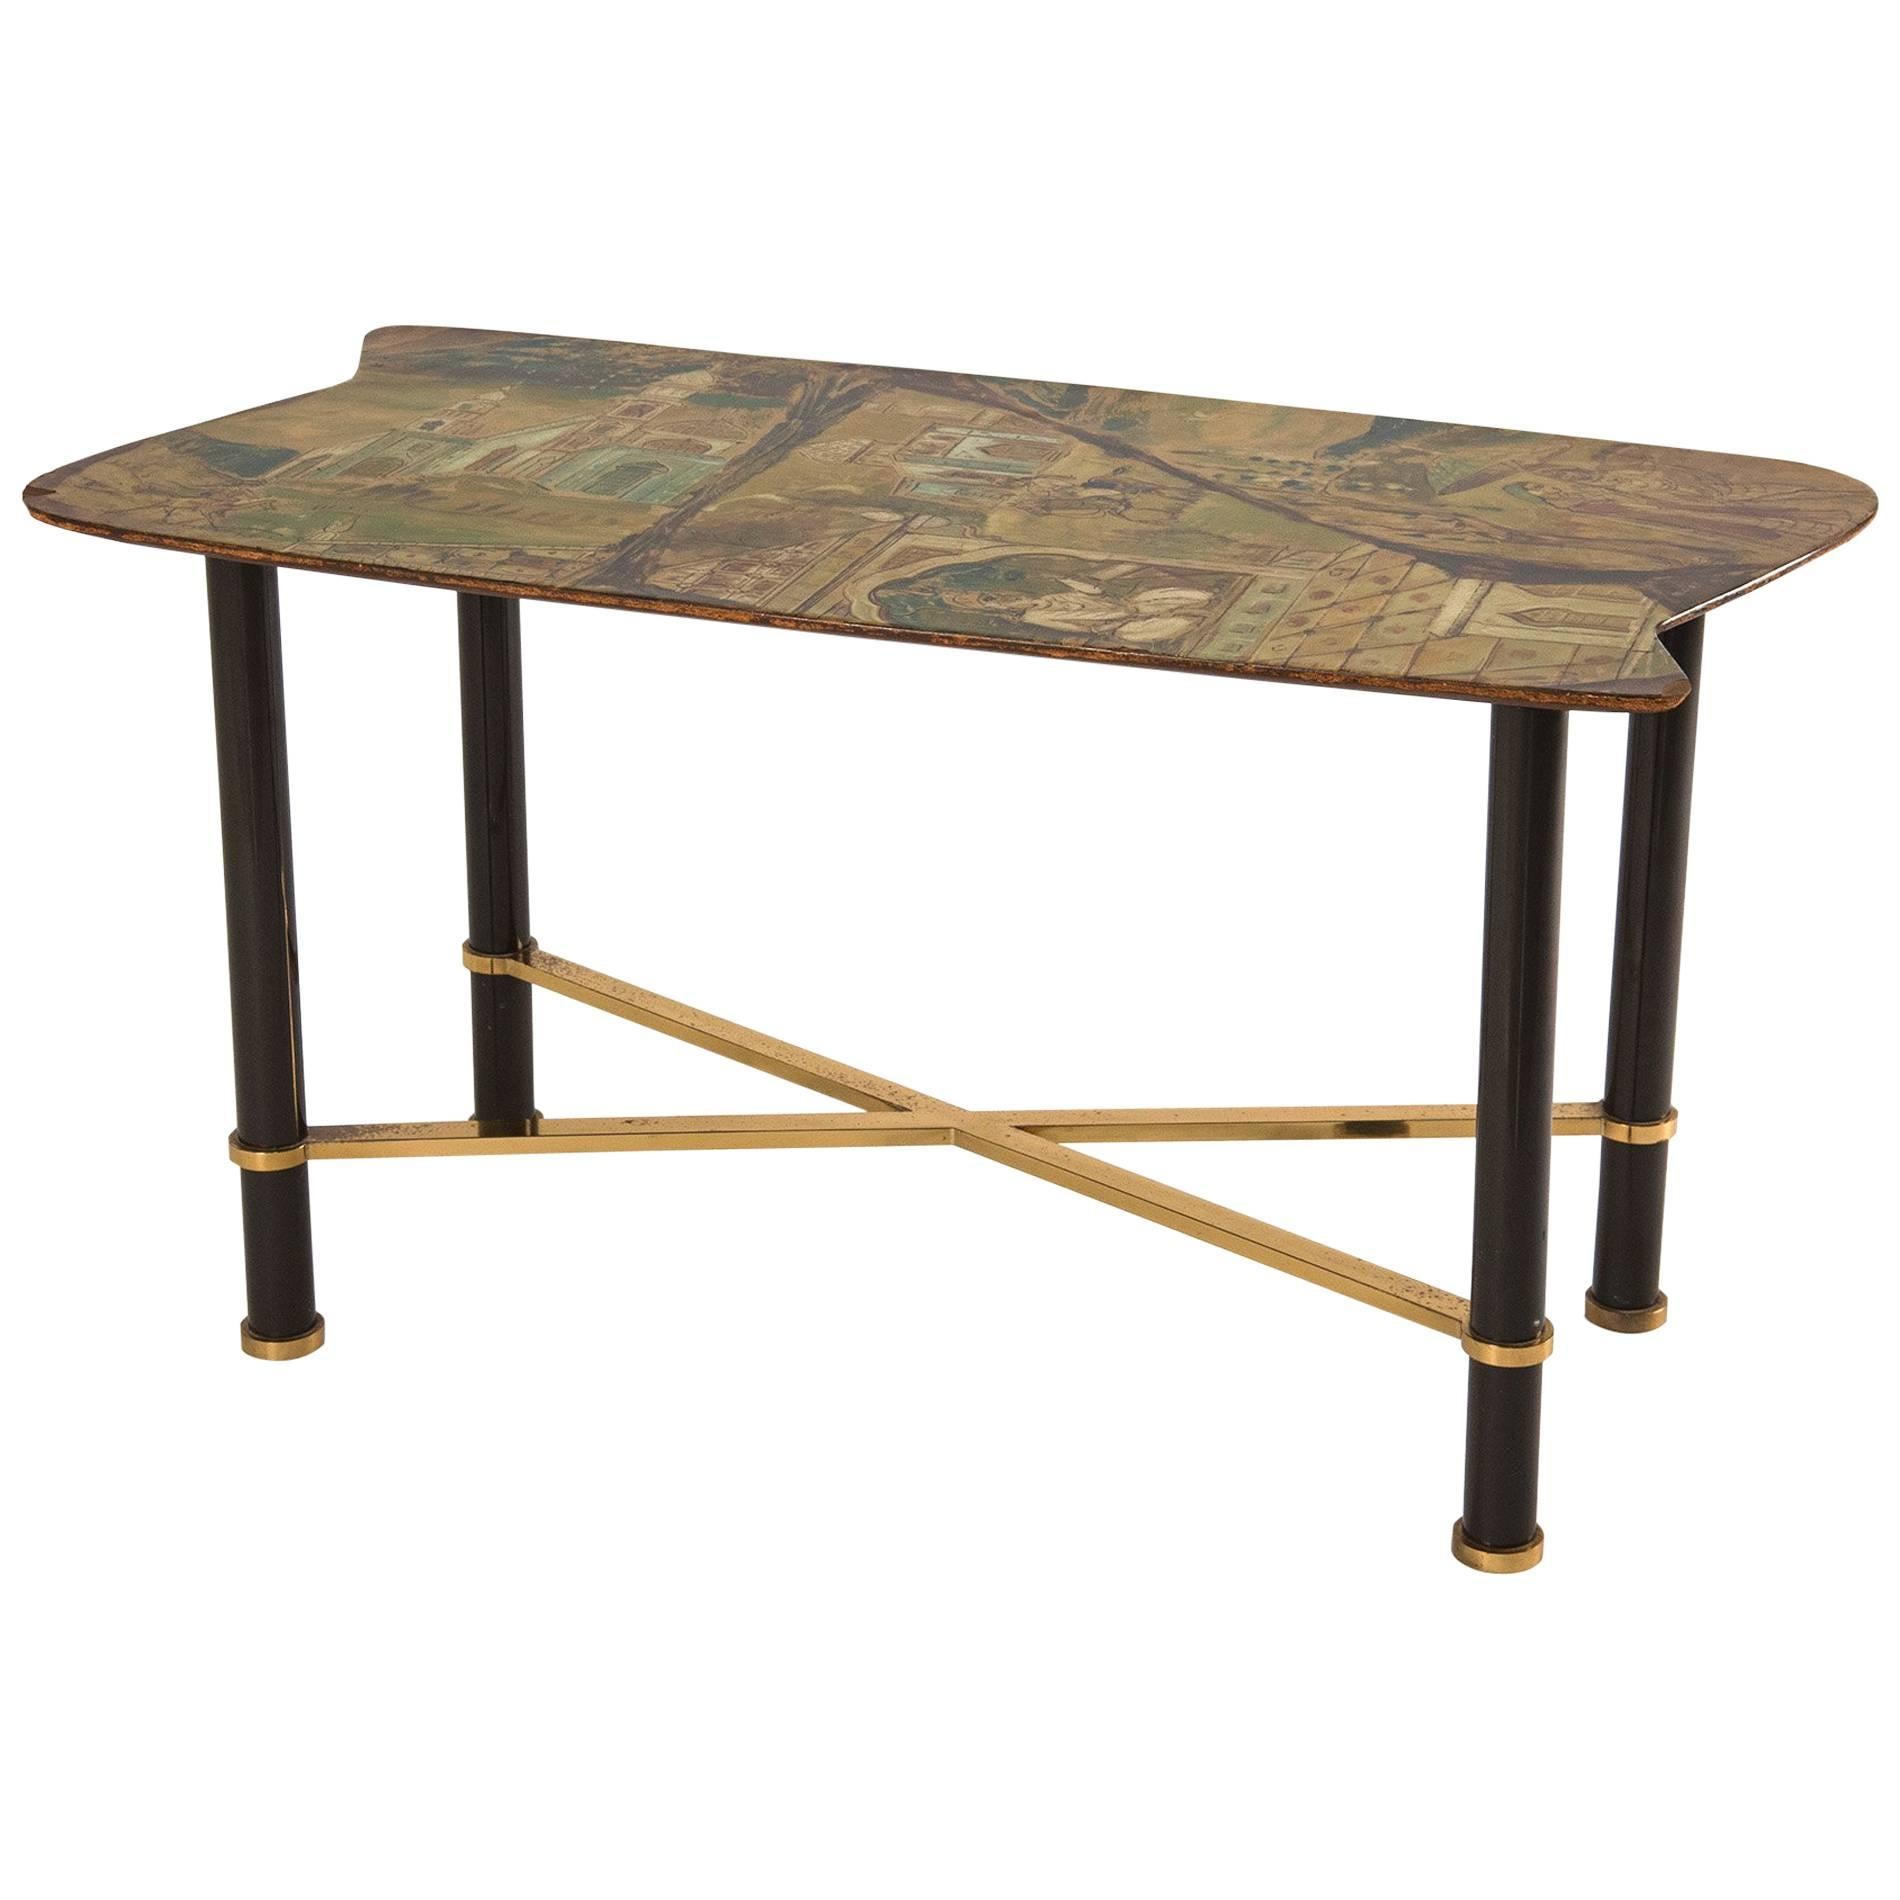 Extraordinary Hand-Painted Low Table by Decalage, Turin, 1956